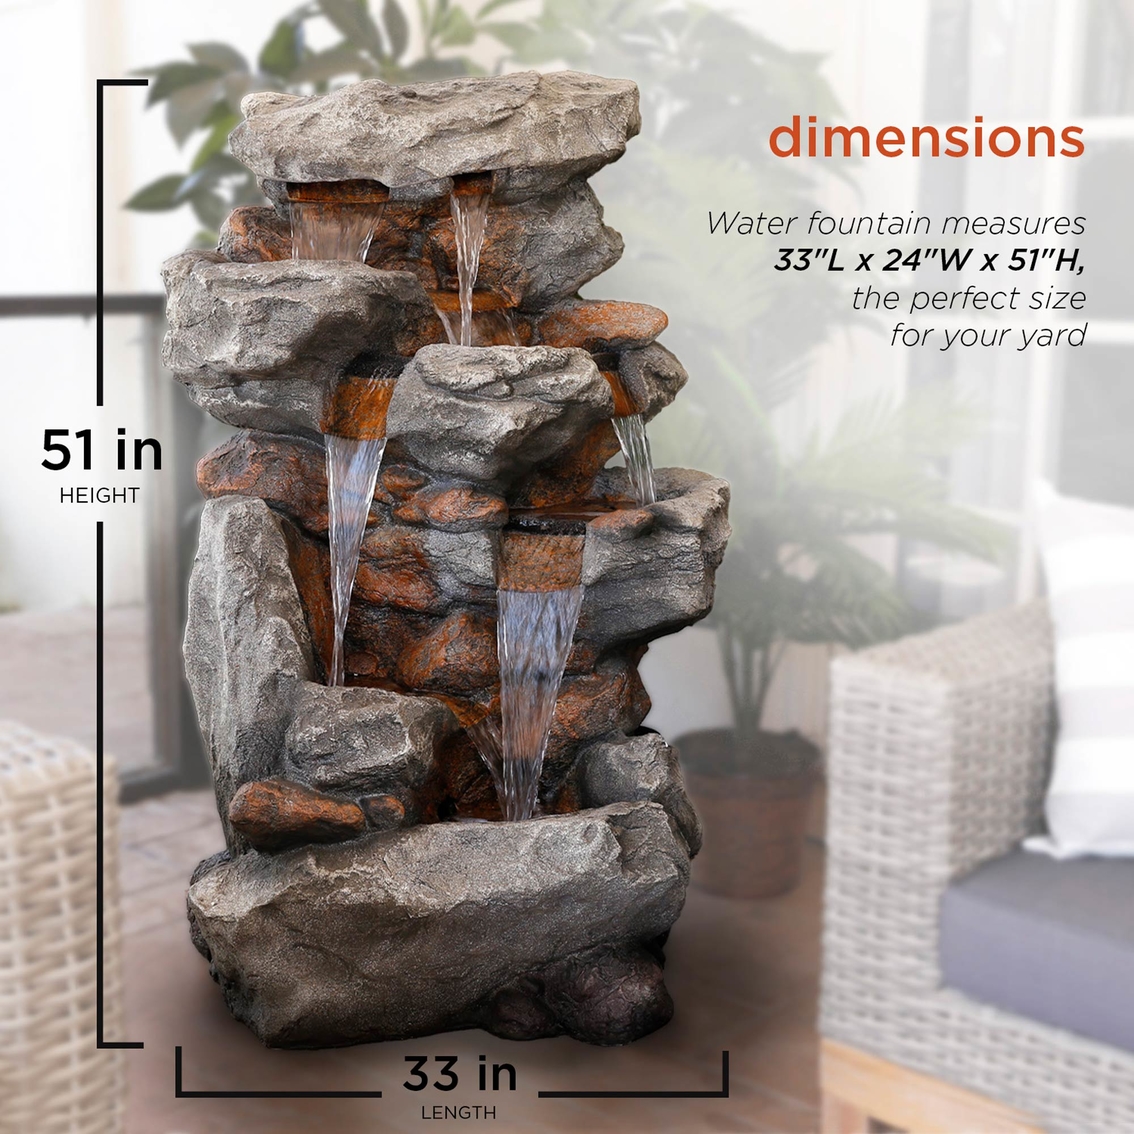 Alpine Rainforest Rock Tiered Fountain with LED Lights - Image 8 of 9